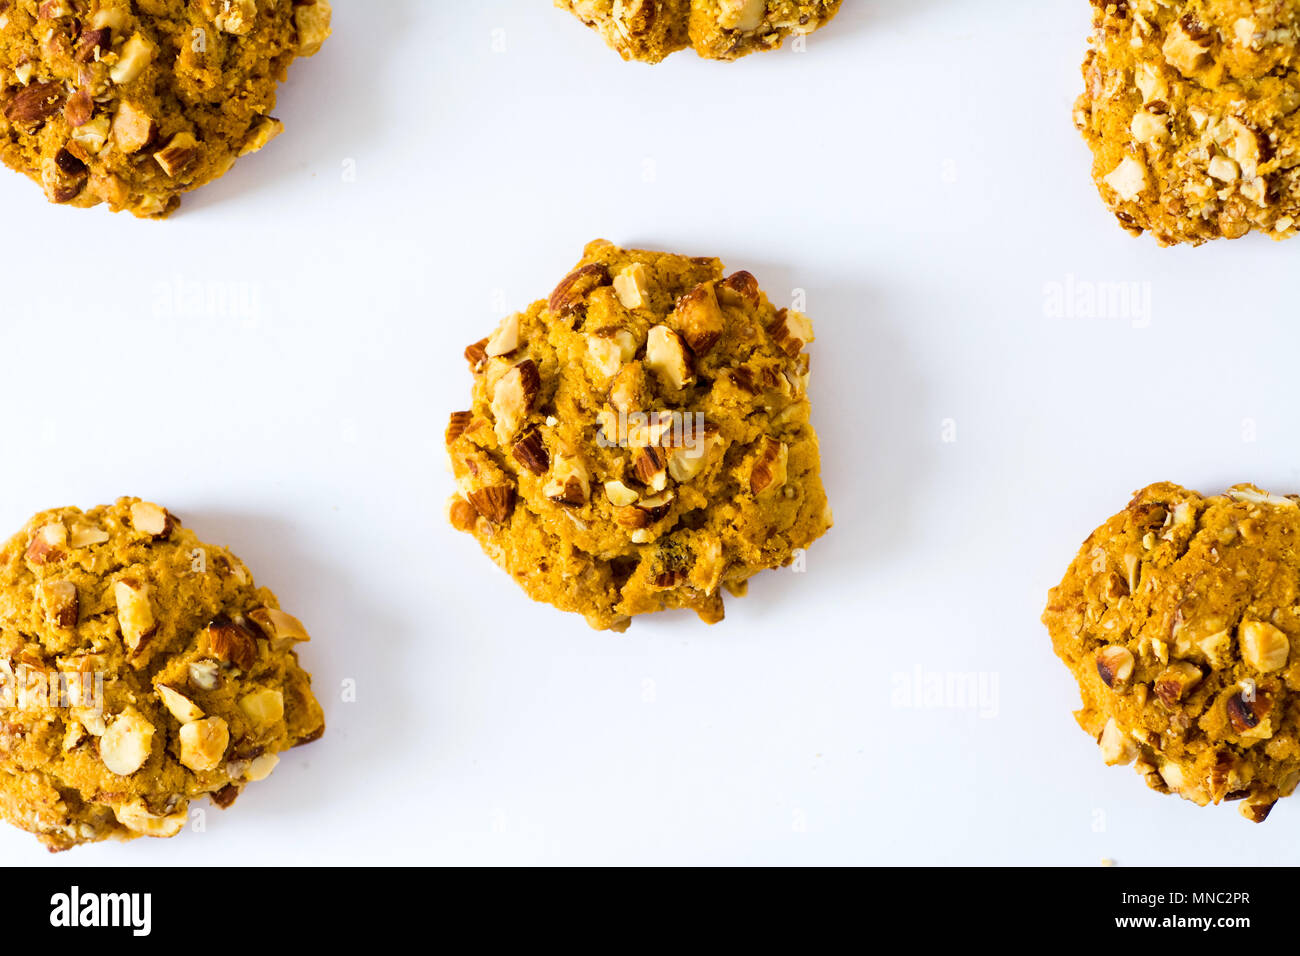 Homemade almond cookies against white background isolated Stock Photo